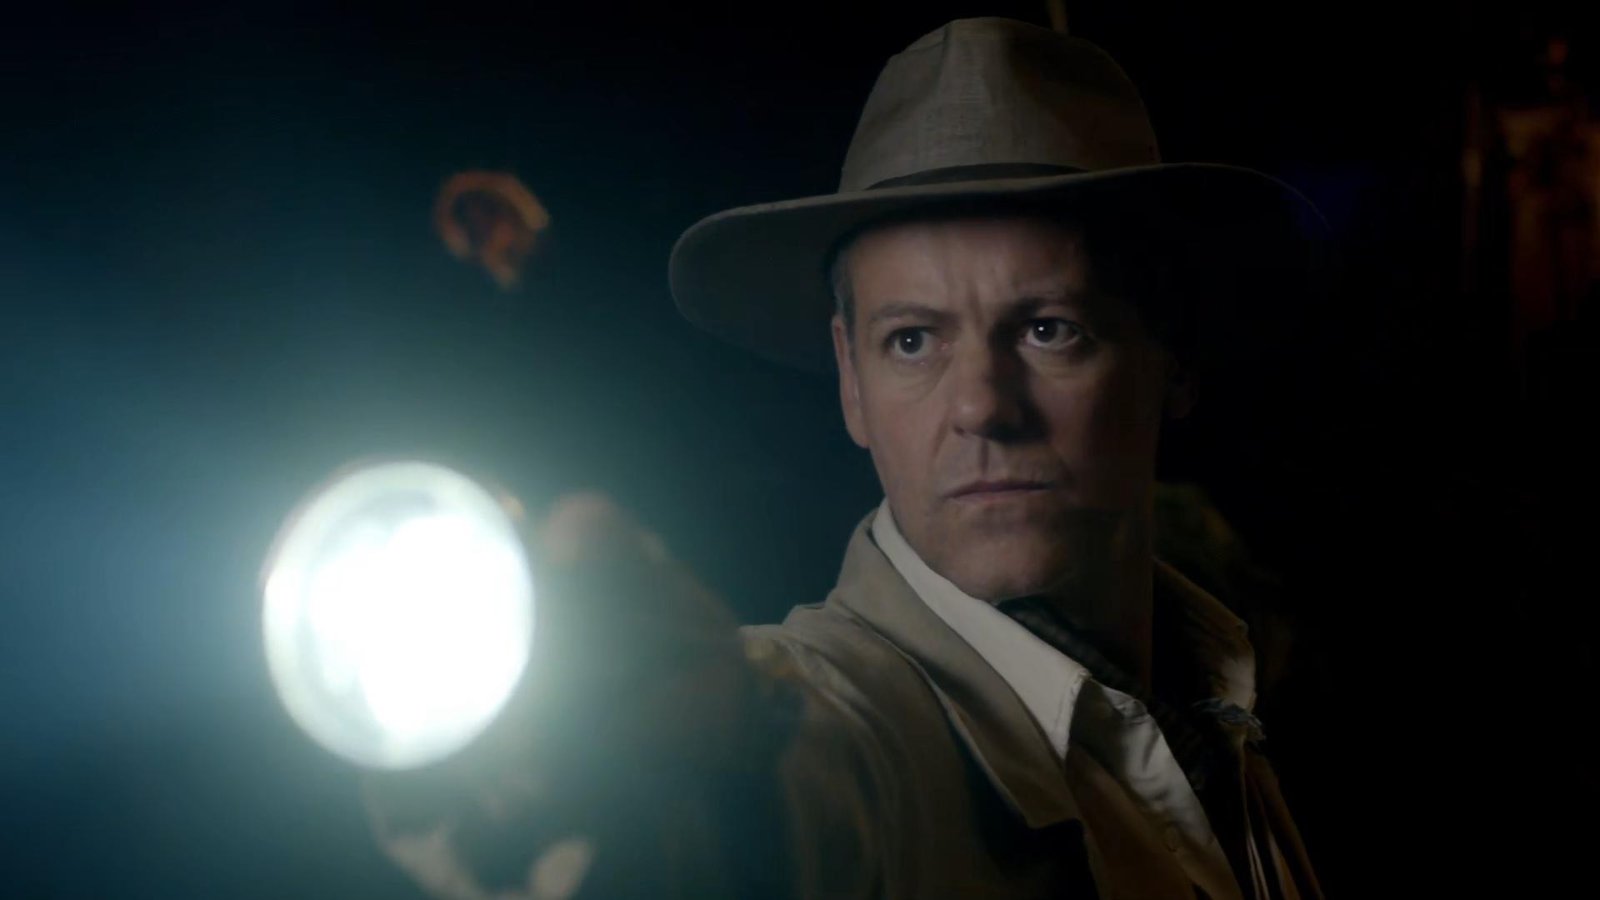 Sherlock and Dinosaurs on a Spaceship Star, Rupert Graves Reflects on Mental Health Struggles